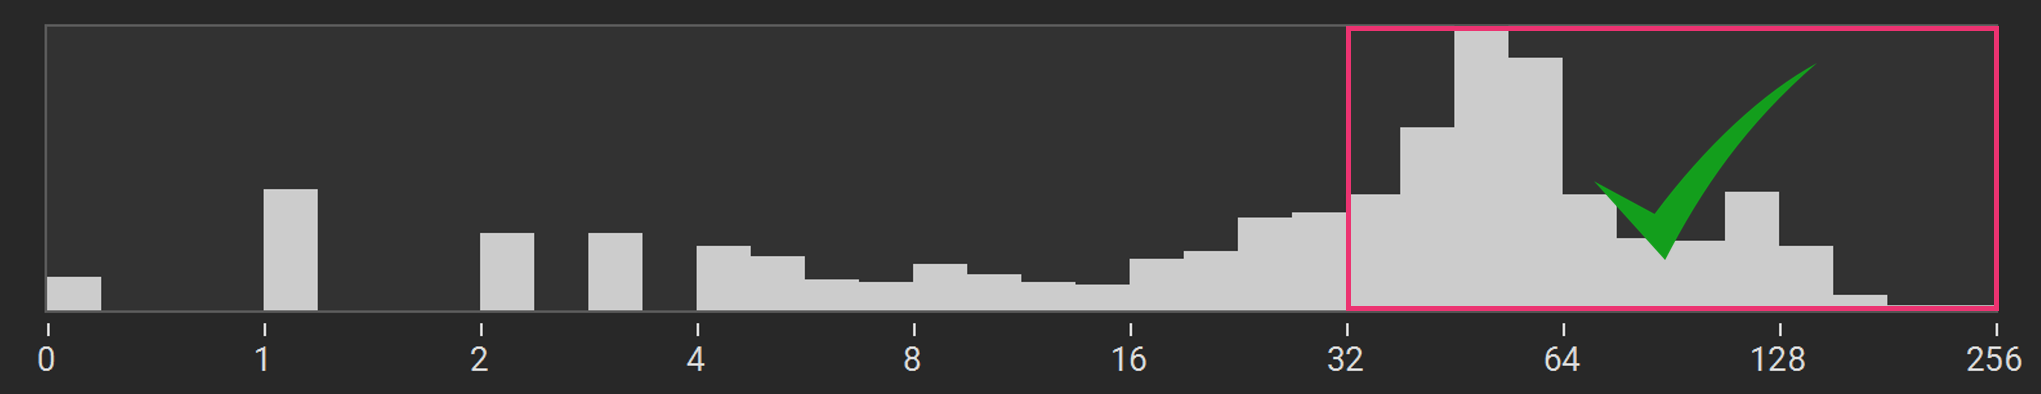 Histogram after finding first acquisition